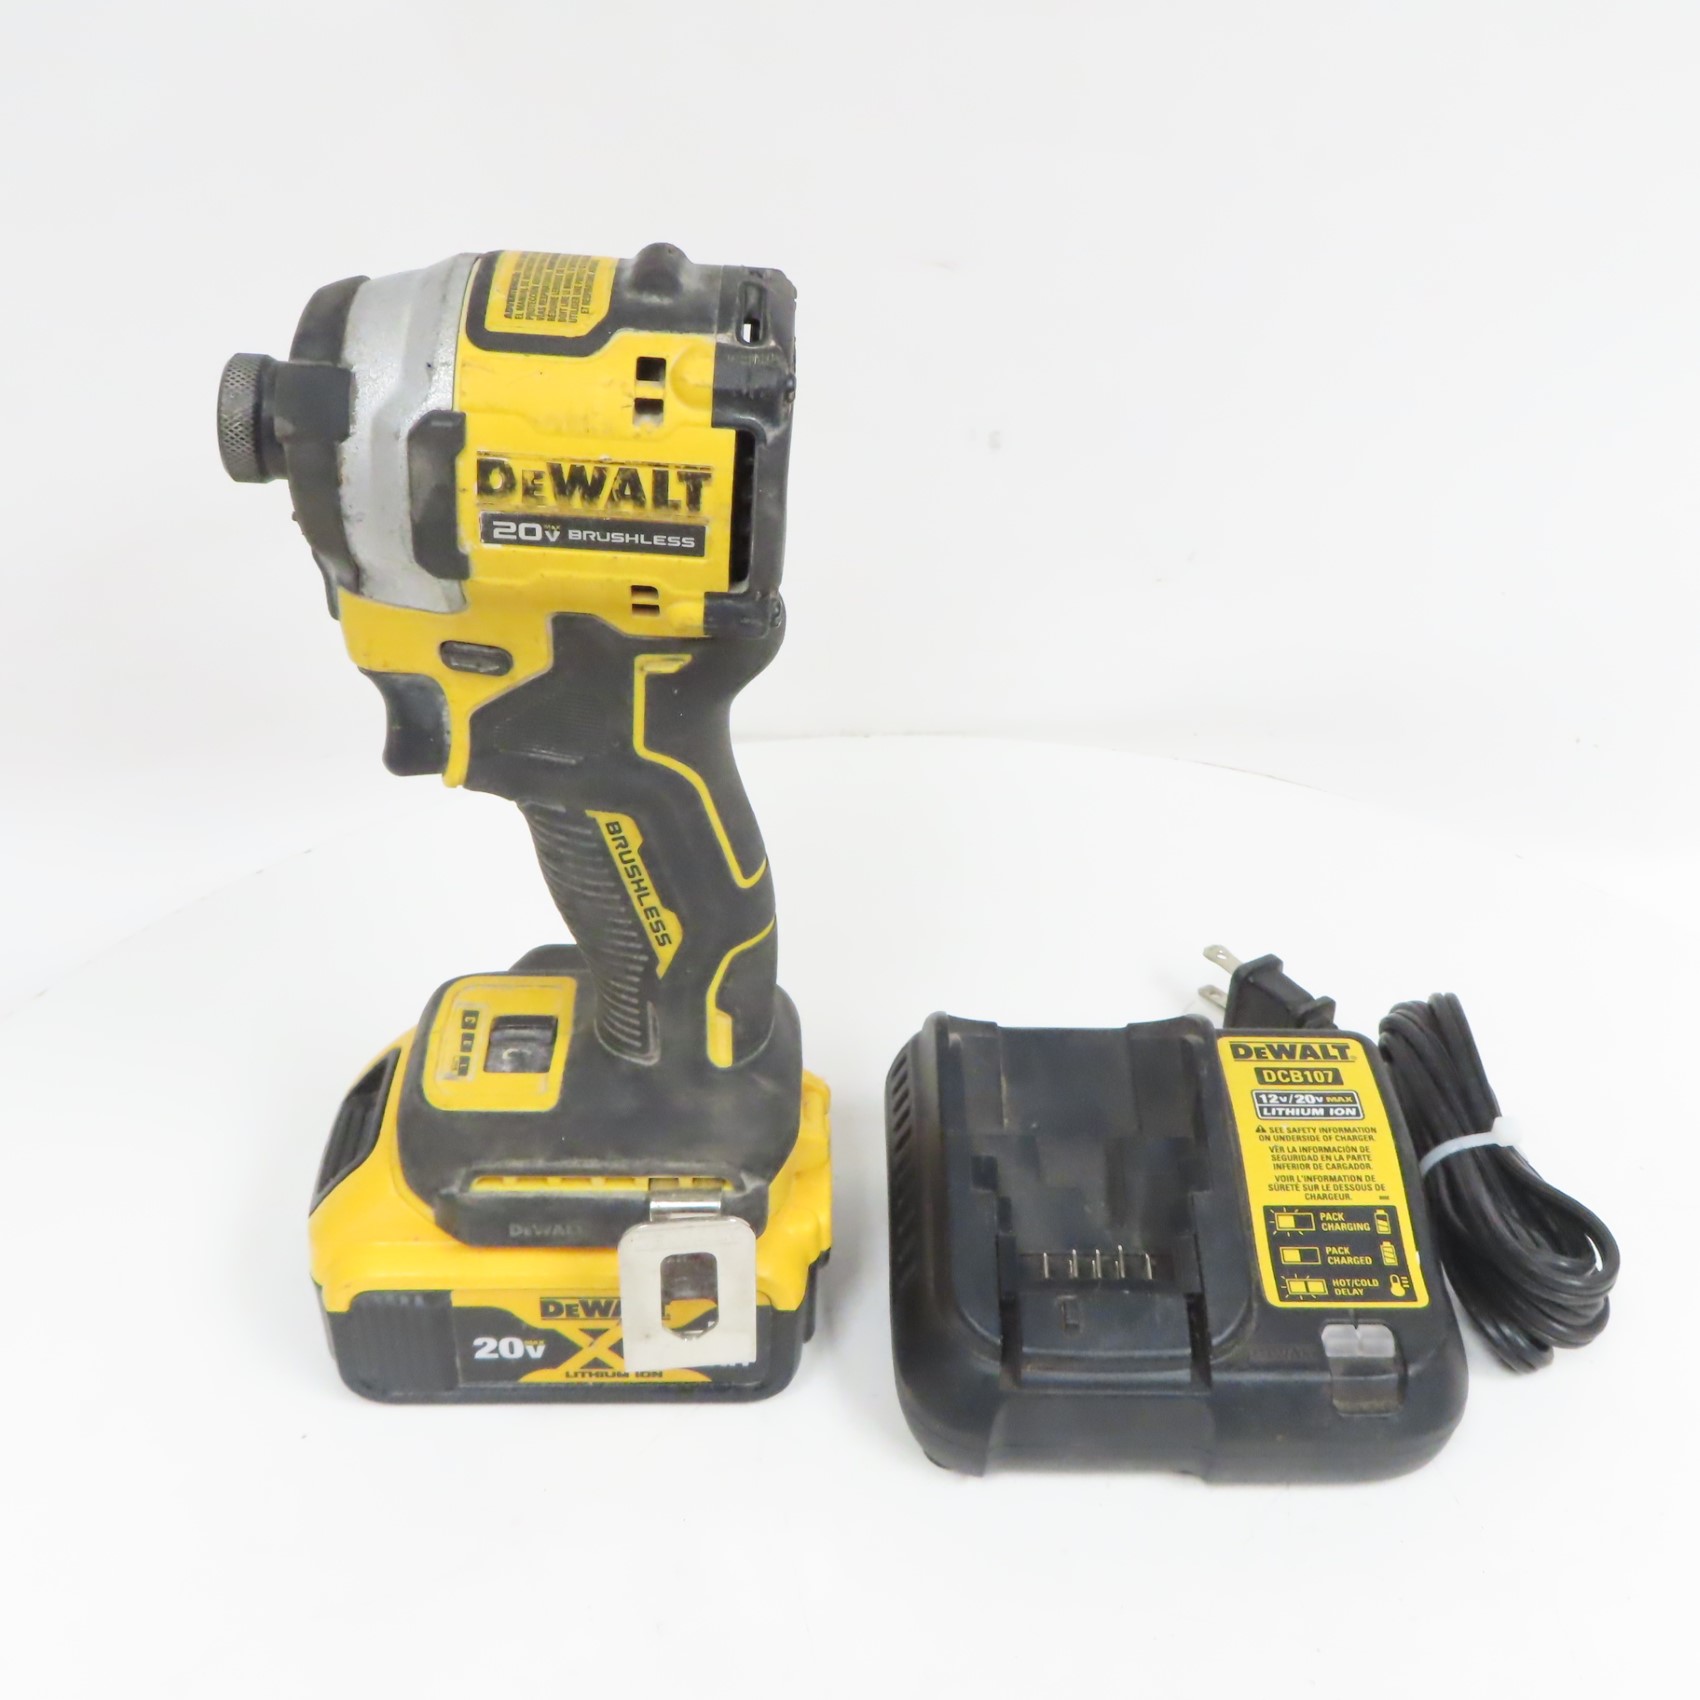 DEWALT 20V MAX Lithium-Ion Cordless 1/4-inch Impact Driver with